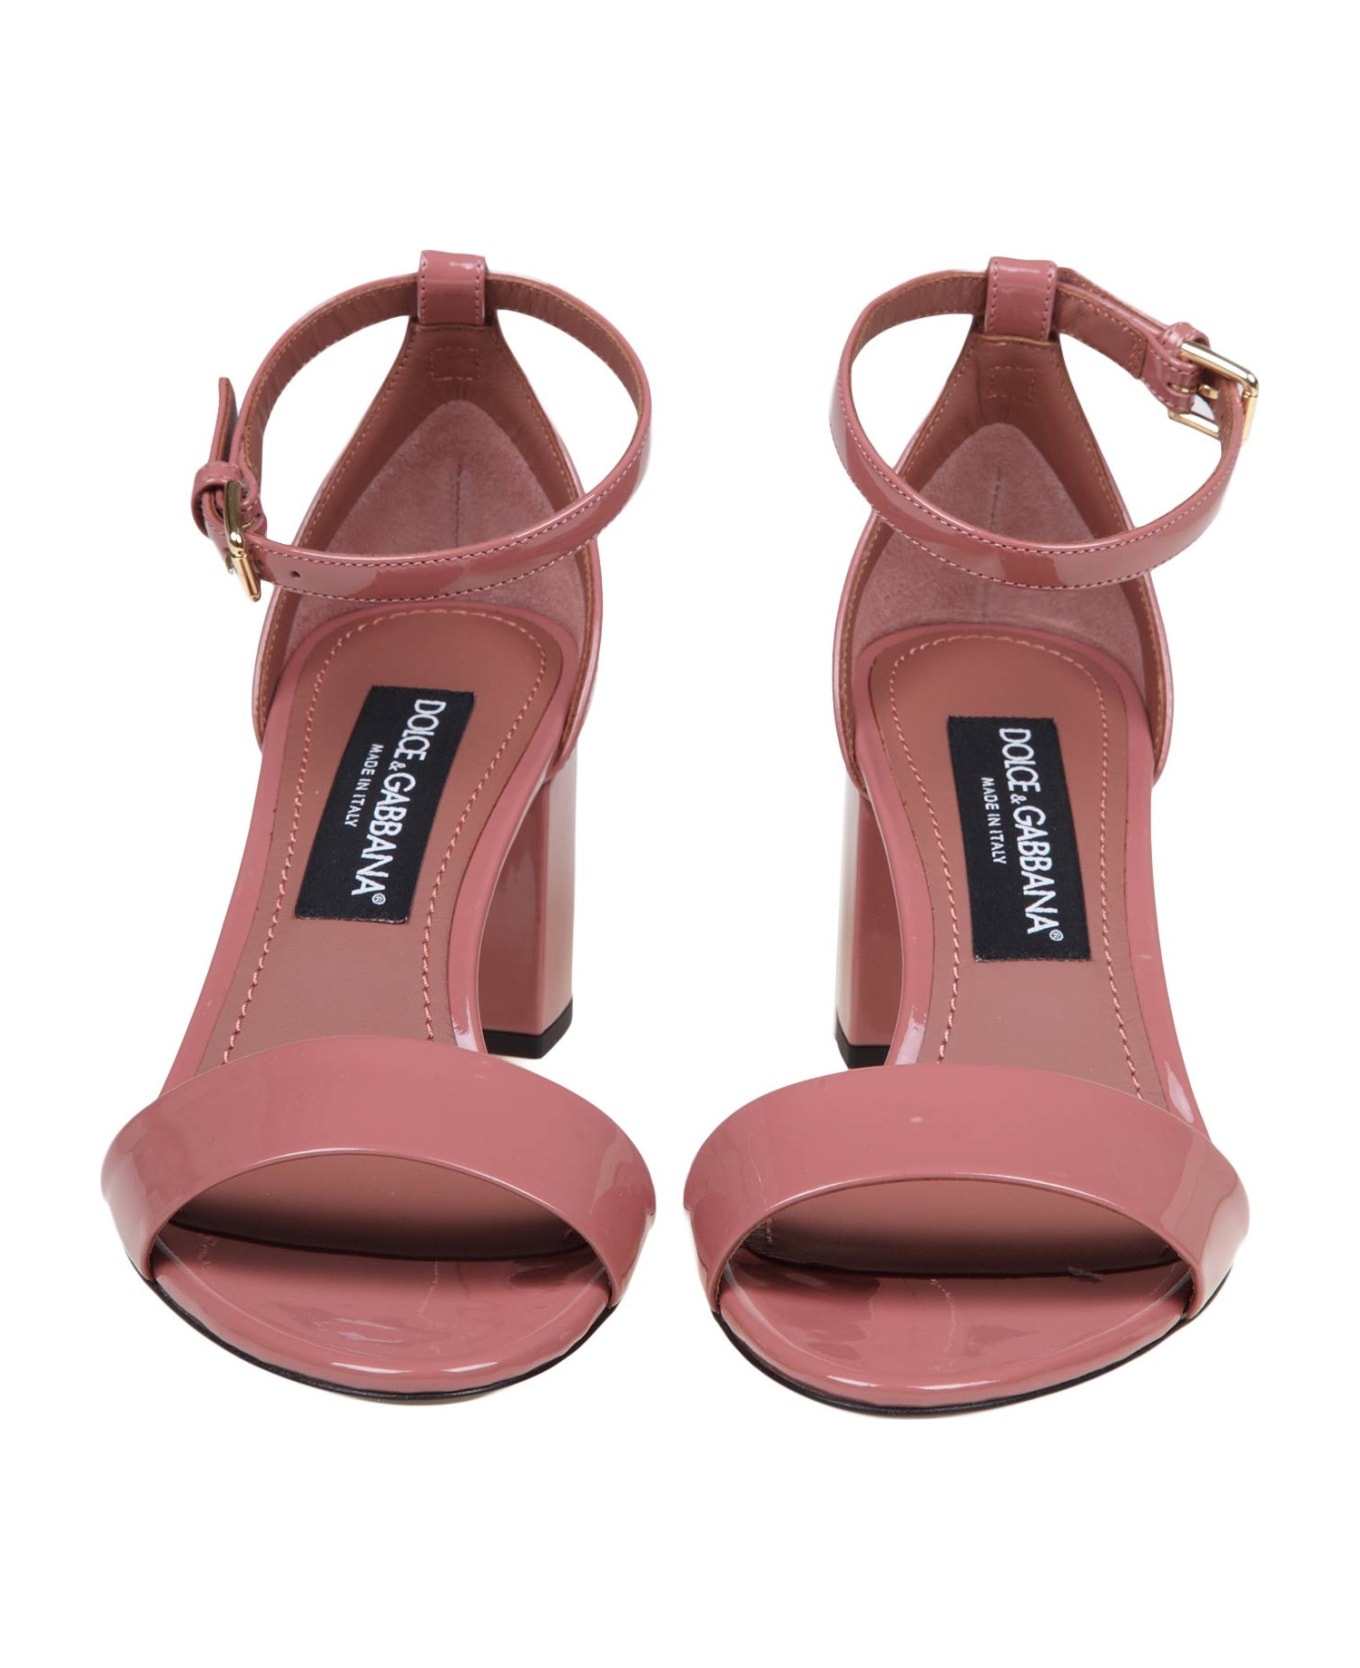 Dolce & Gabbana Pink Paint Leather Sandals - PINK